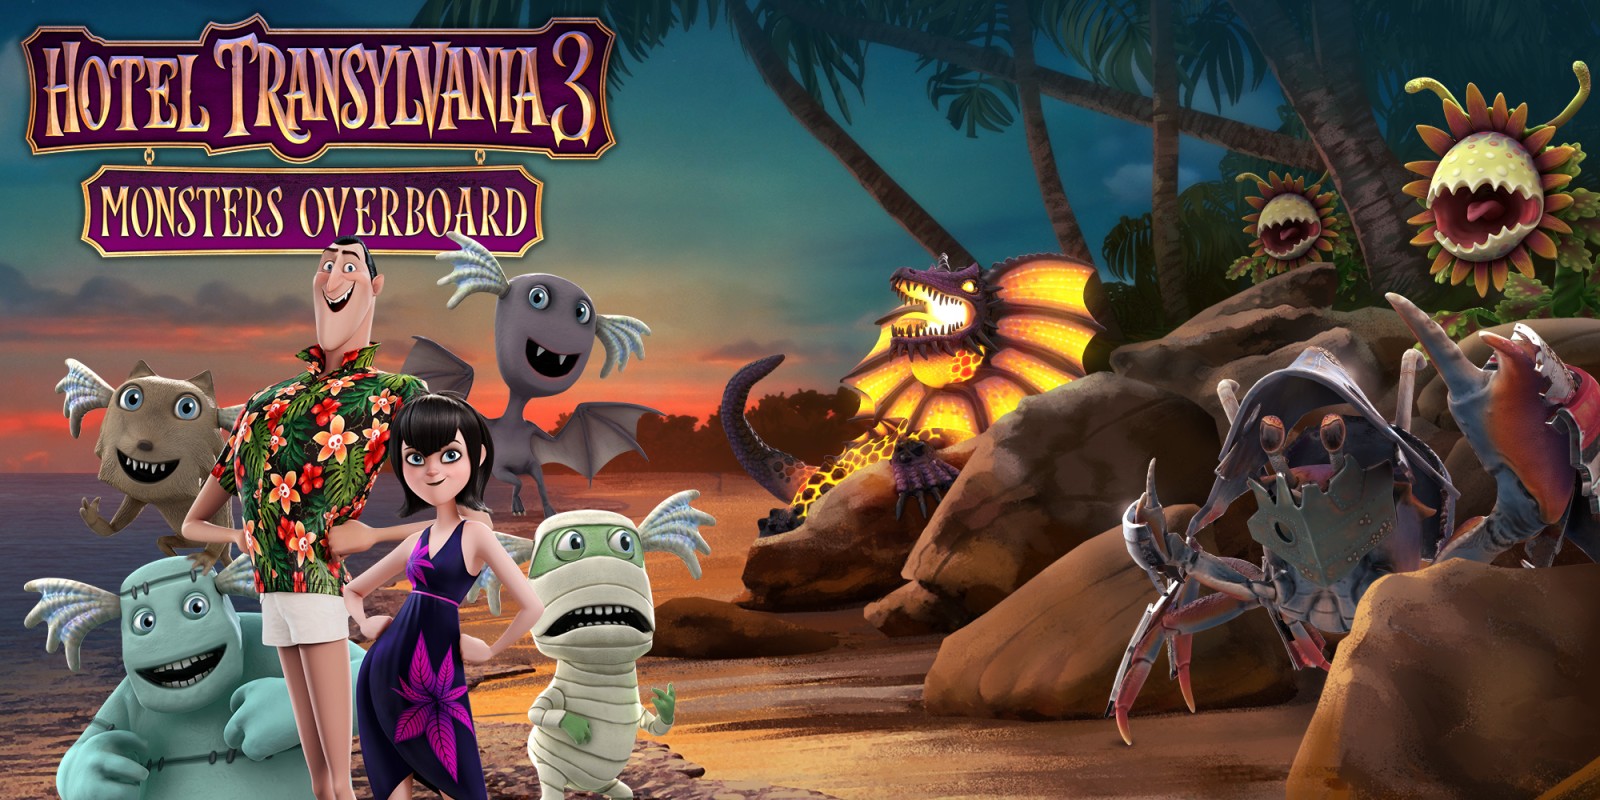 Hotel Transylvania 3: Monsters Overboard